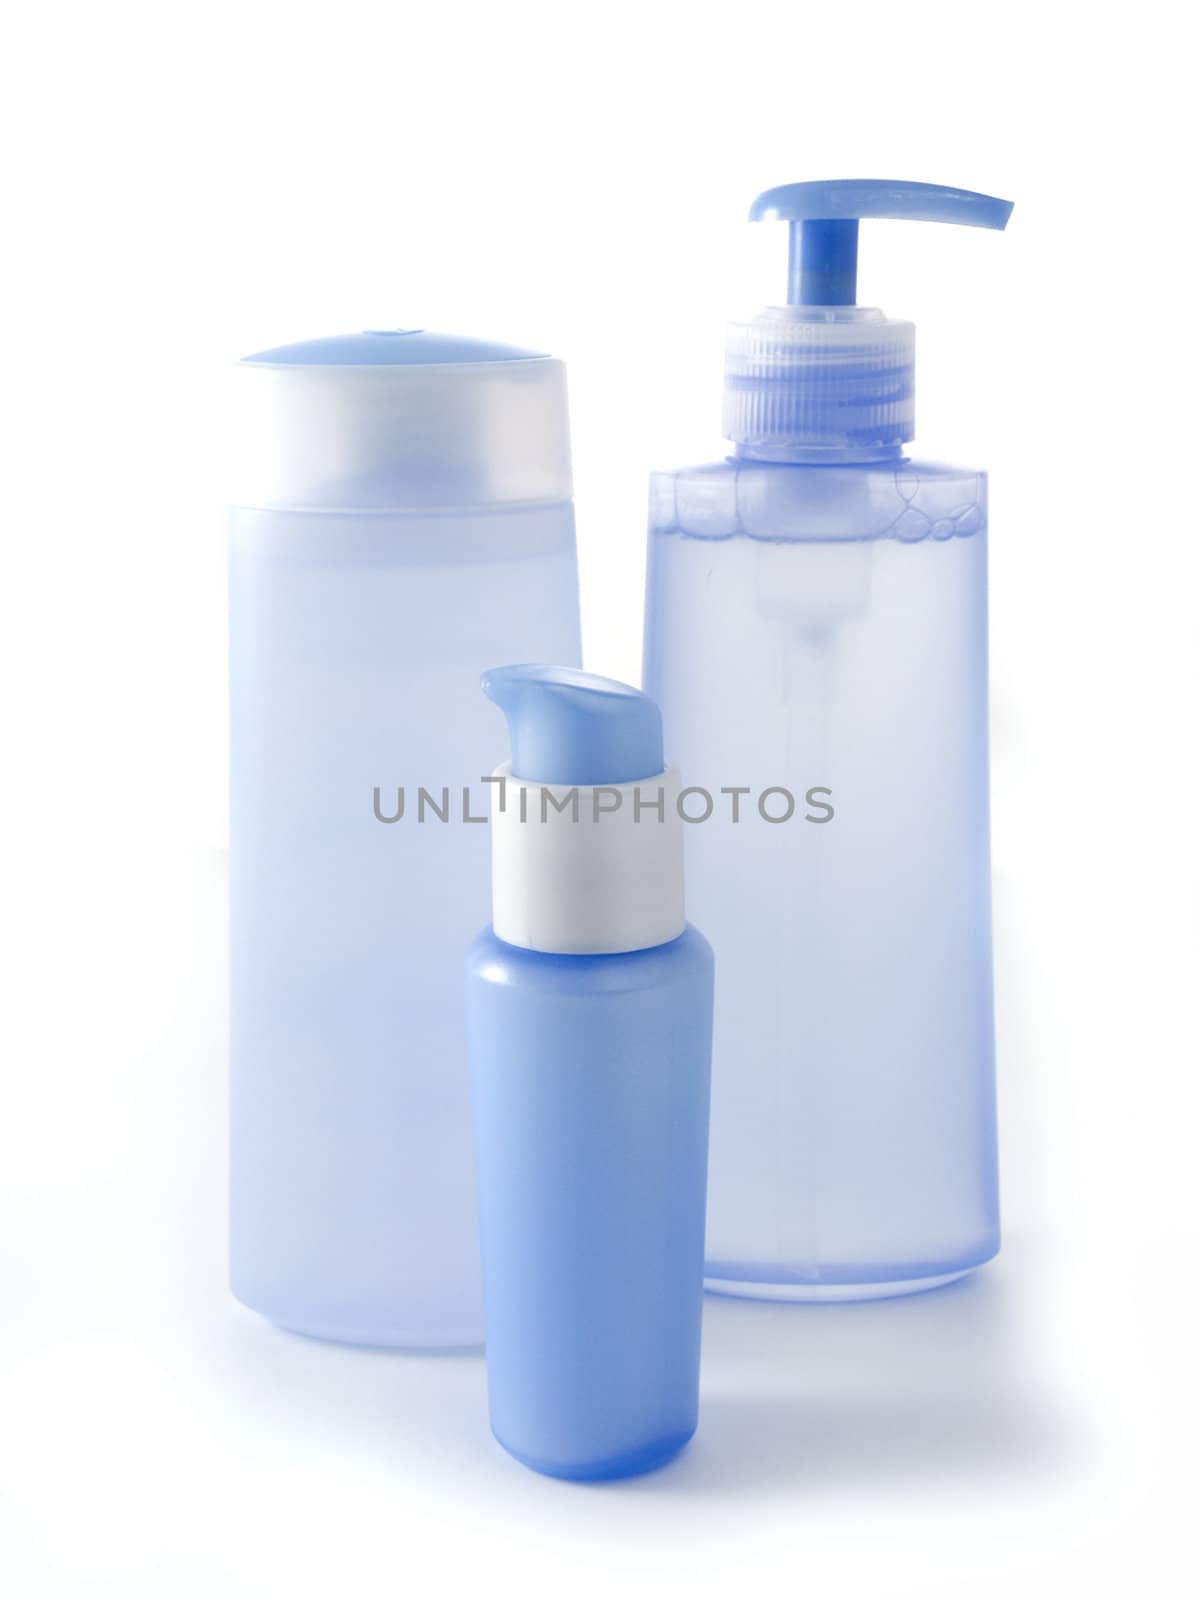 blue cosmetic bottles without labels isolated on white background